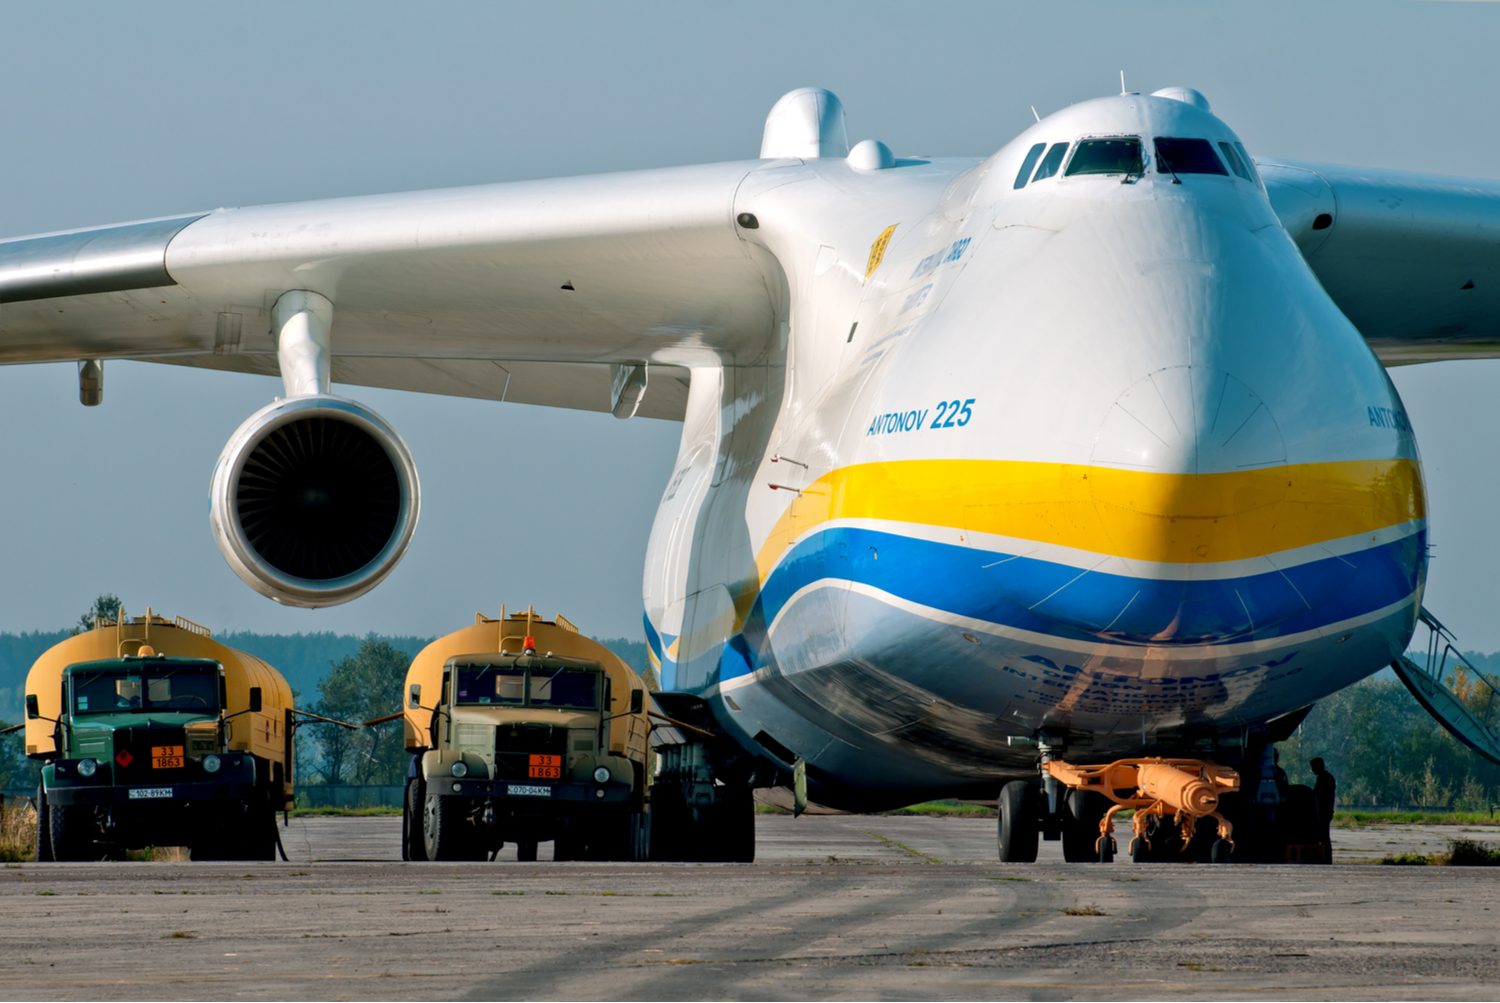 The Antonov An-225 Mriya was the biggest plane in the world. Unfortunately it was destroyed in Ukraine at the start of the Ukrainian and Russian conflict. 